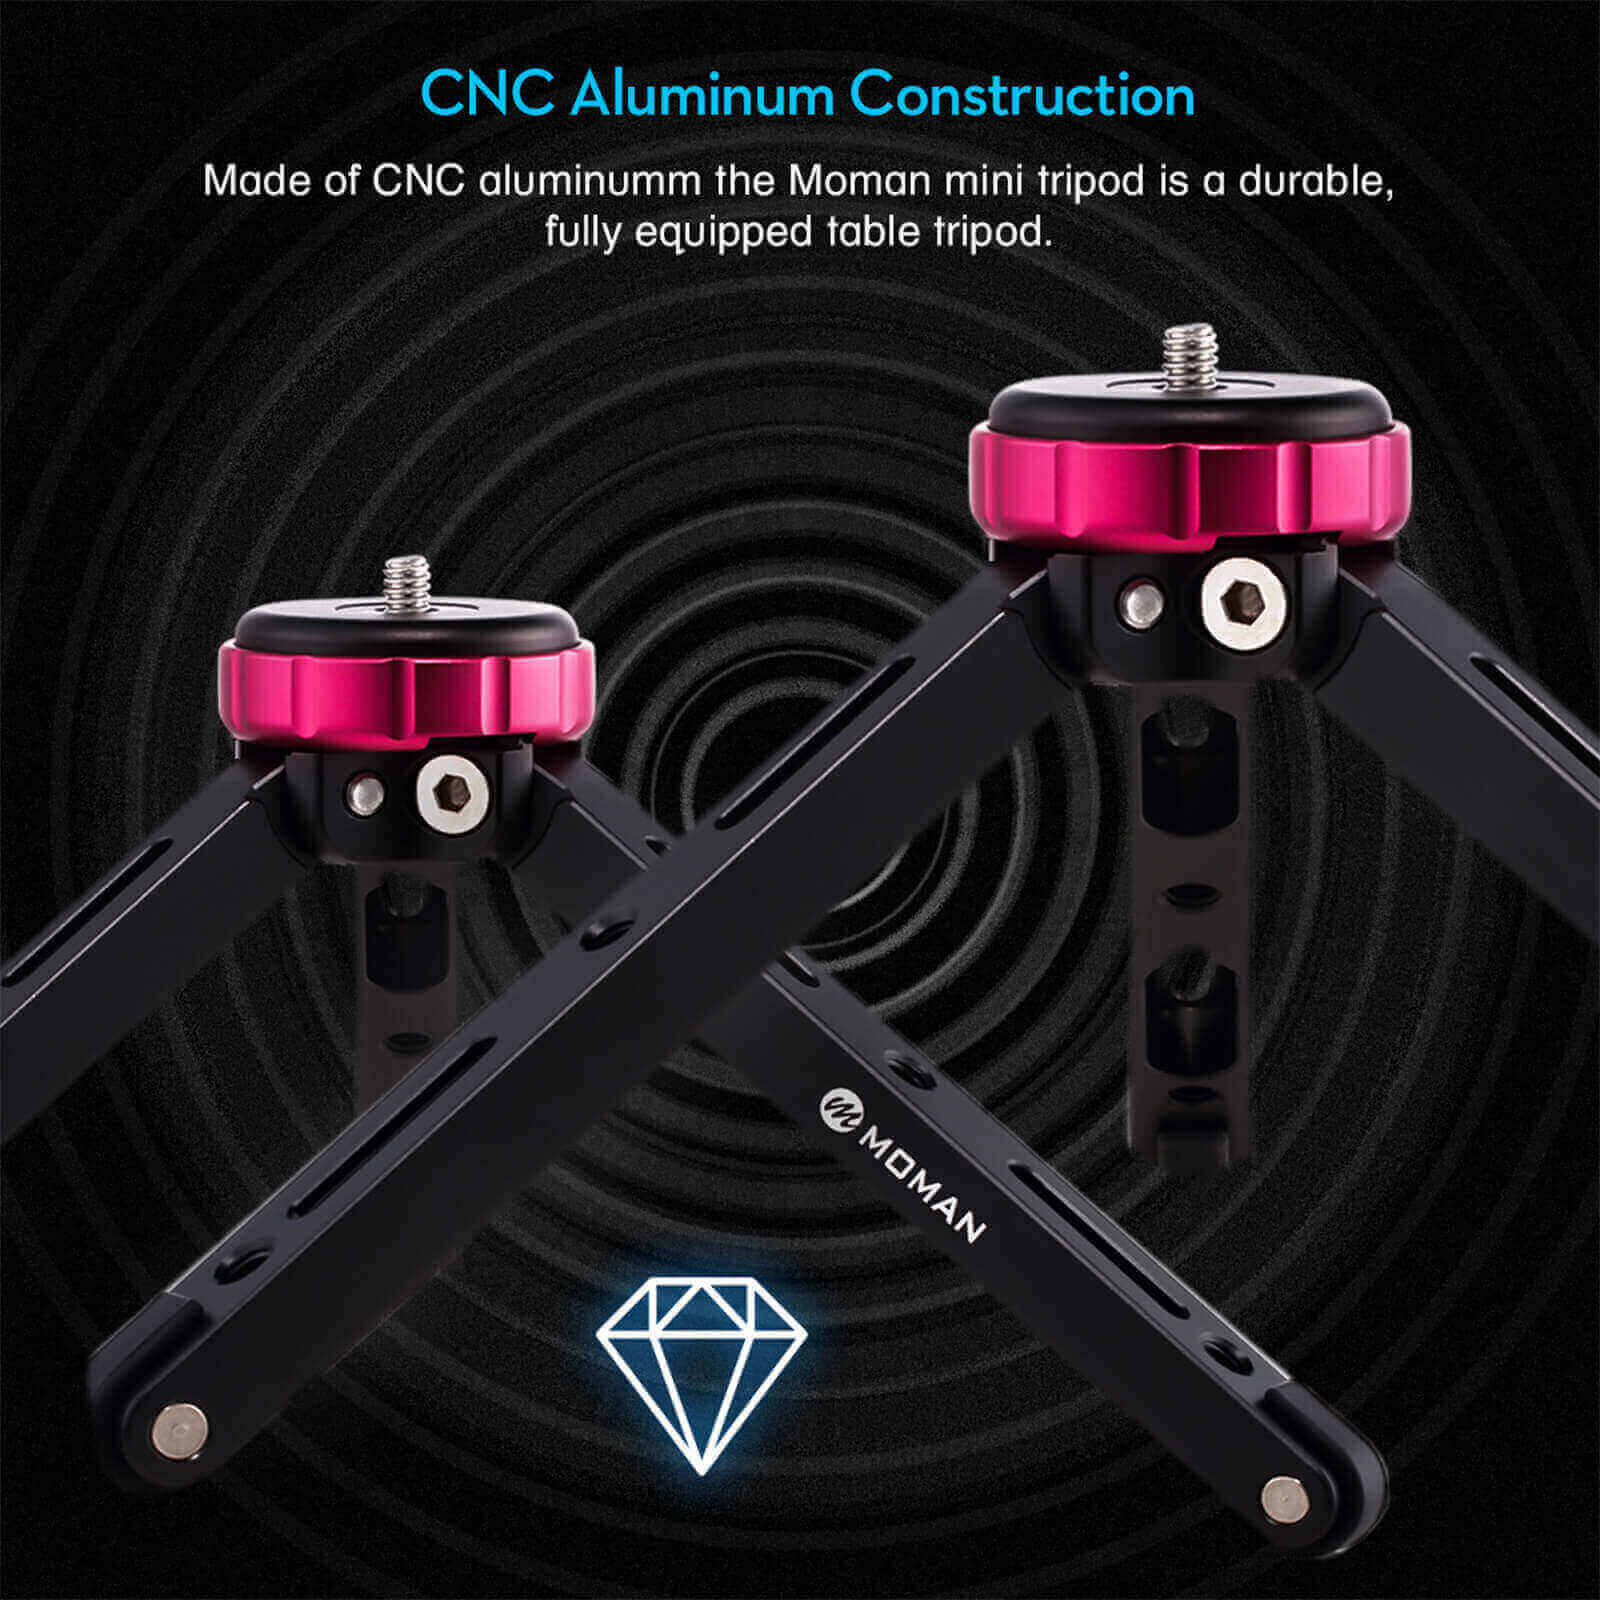 Moman TR1 mini tripod is of CNC aluminum construction, being durable and reliable